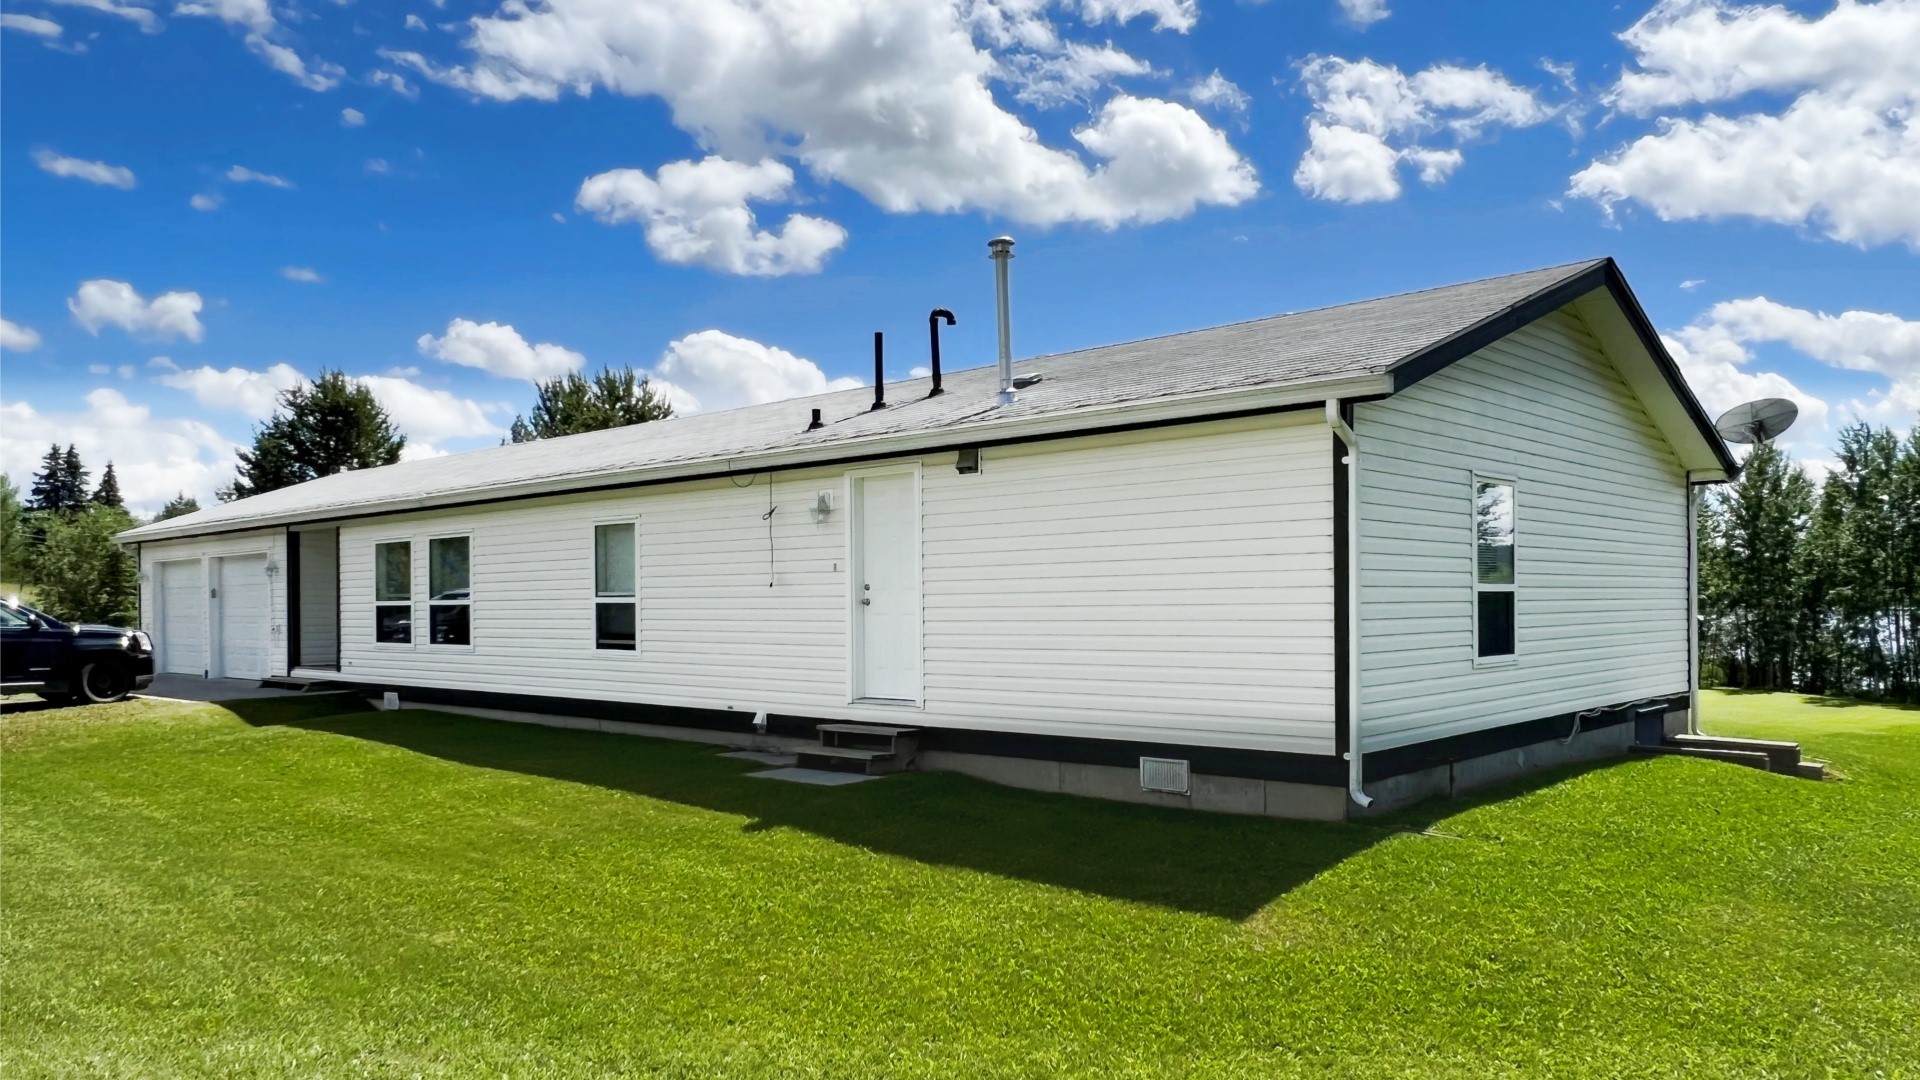 Legislation and Requirements for Manufactured Homes